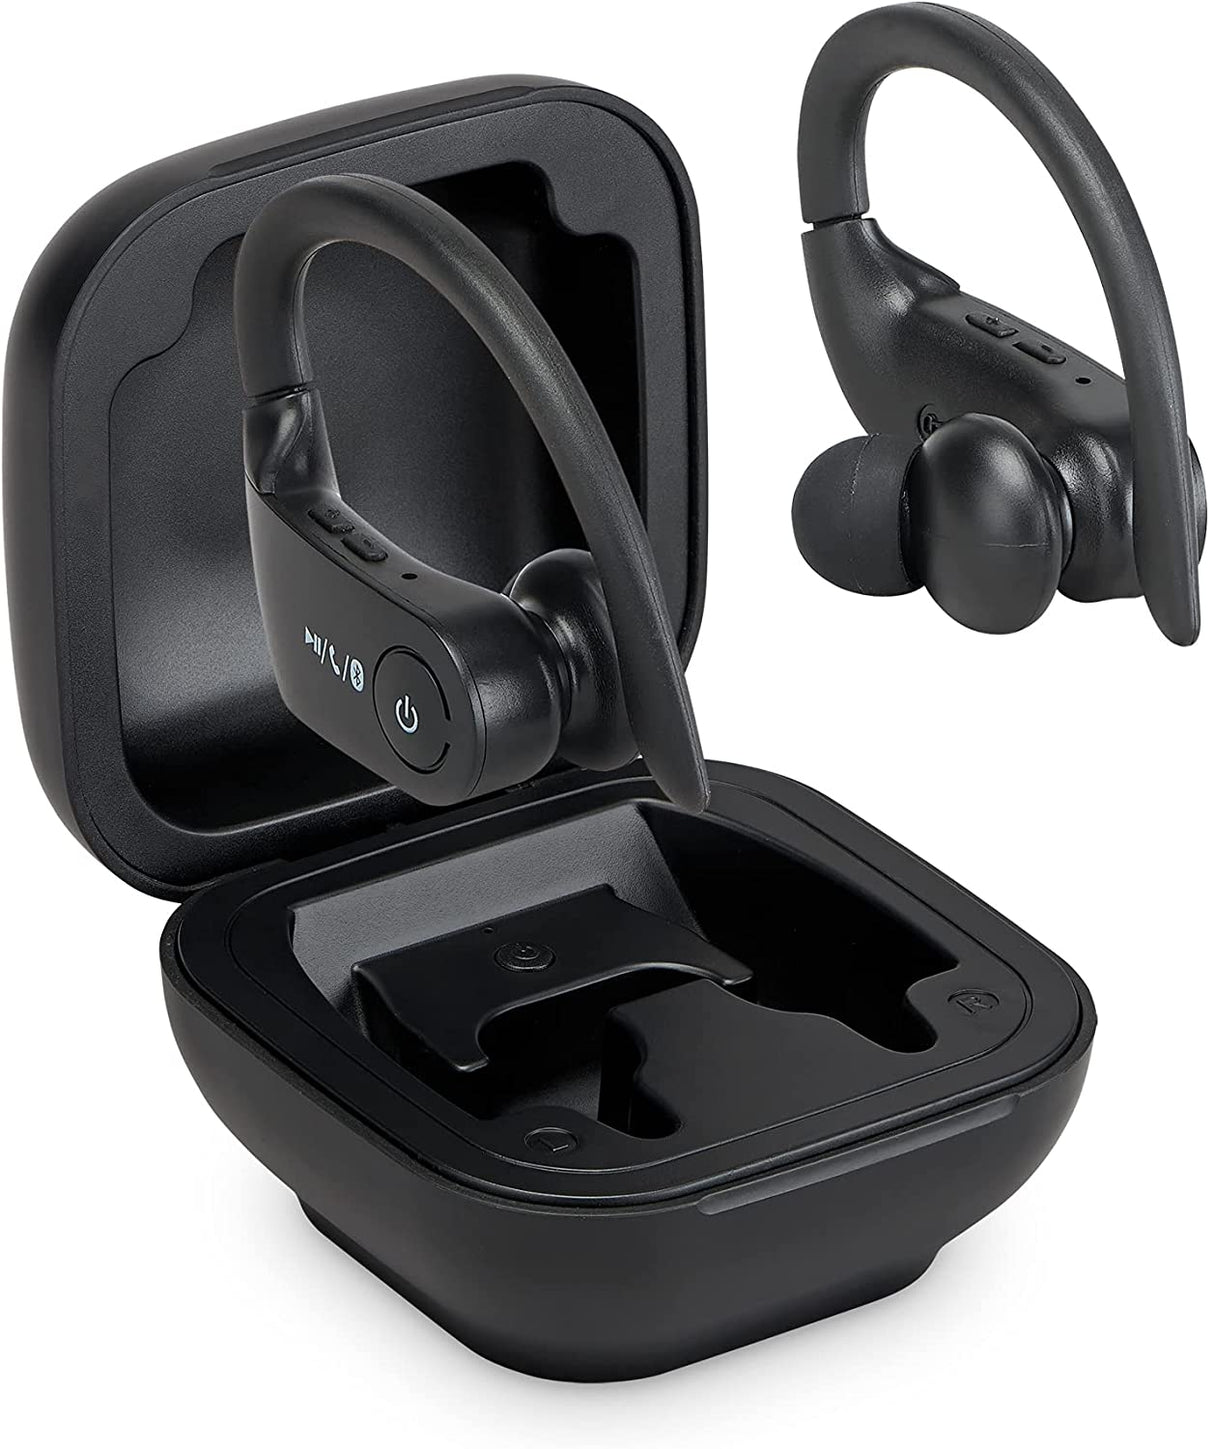 iLive Truly Wire-Free Earbuds, Sweat Resistant, Includes 3 Set of Ear Tips, Black (IAEBT270B)